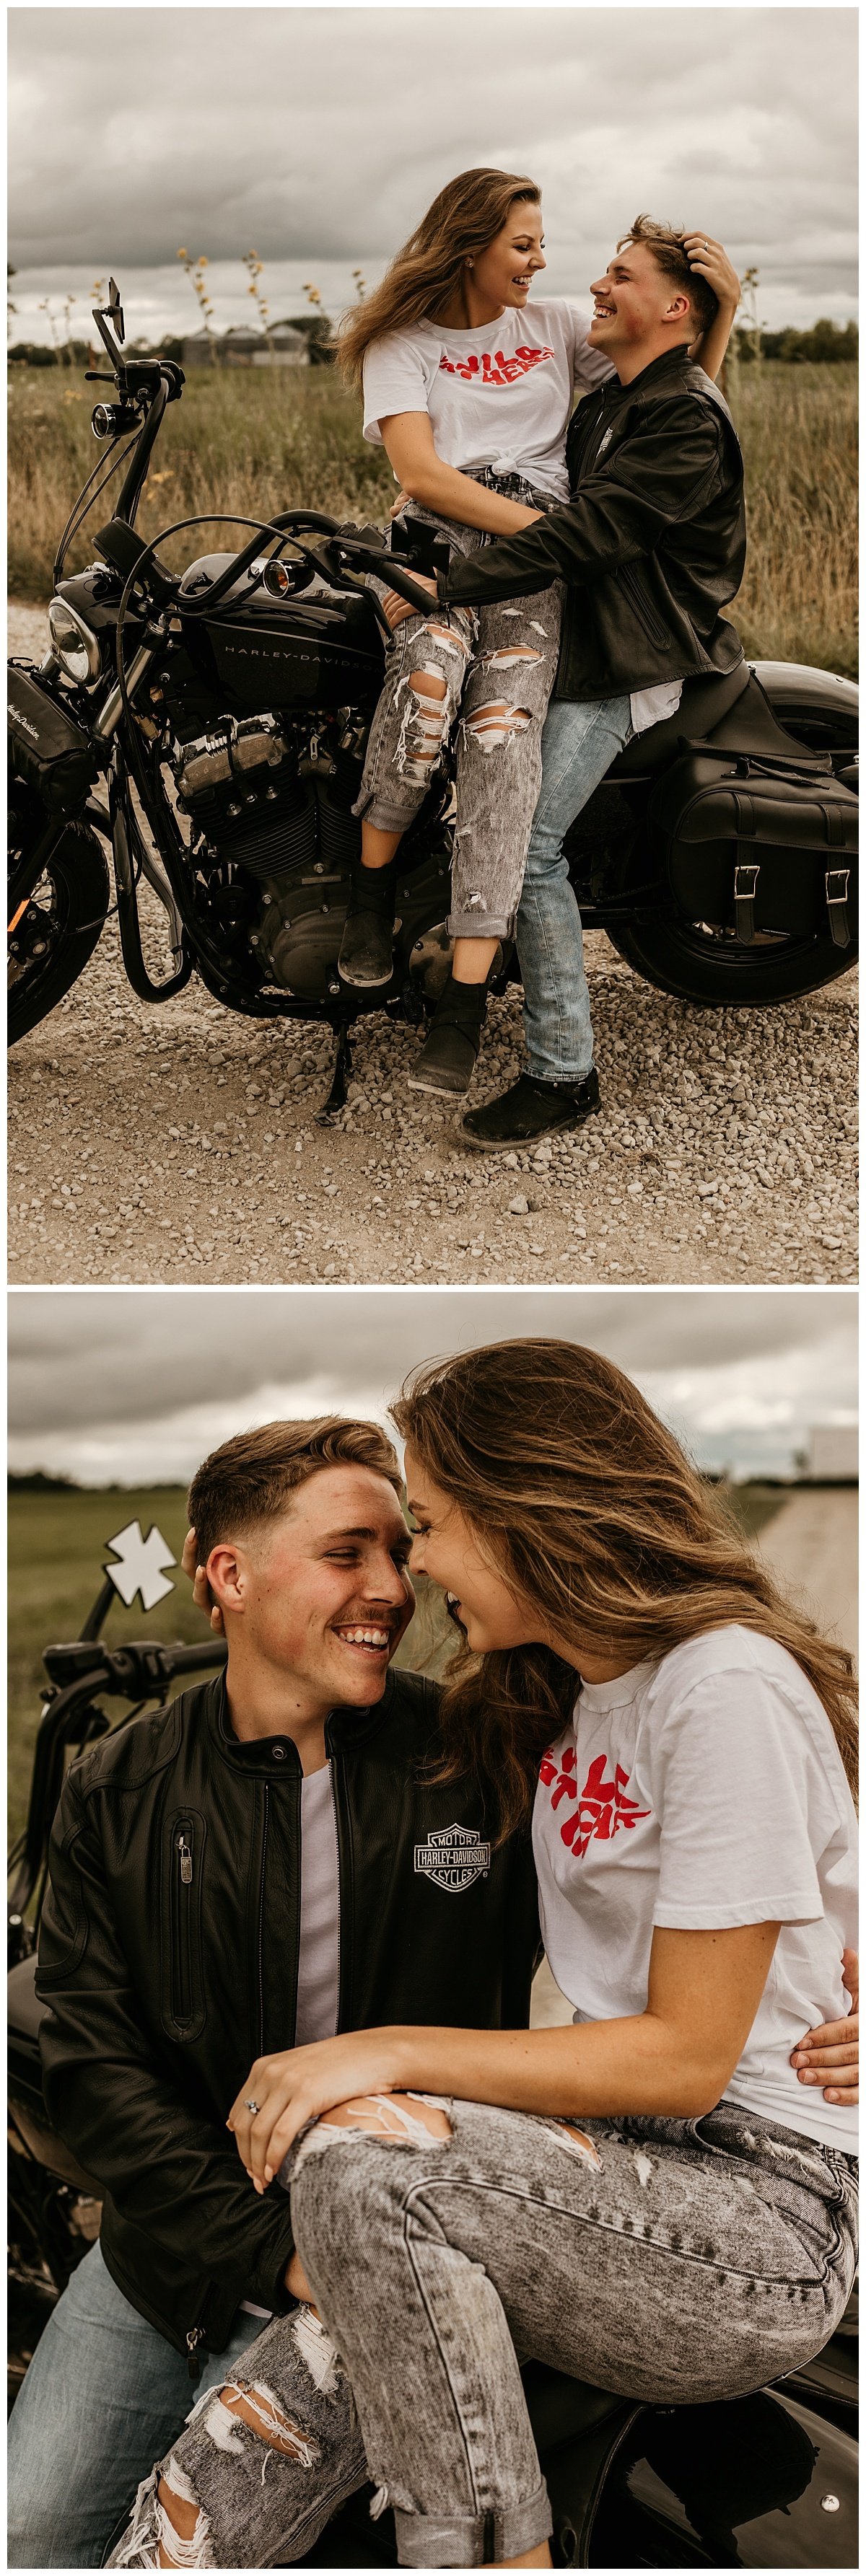 motorcycle+session+_+adventure+session+_+engagement+session+_+motorcycle+photos+_+lana+del+rey+_+ride+or+die+_+adventurous+couple+_+kansas+city+photographer+_+kansas+city+photography (11).jpeg